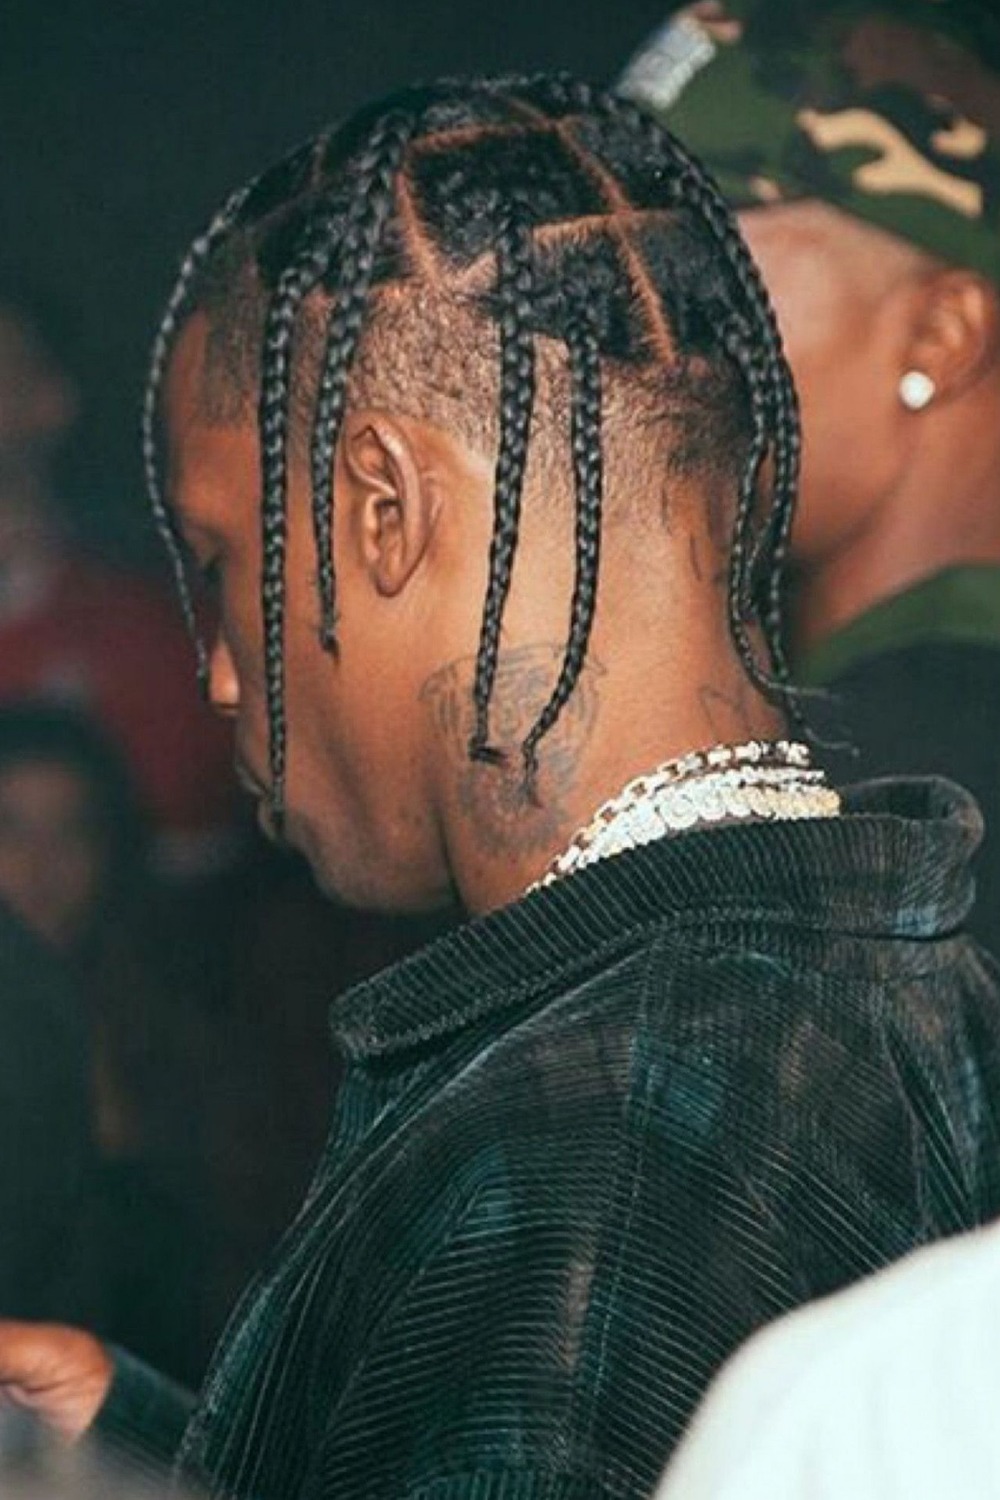 What is Travis Scott's hairstyle called? Knotless Braids